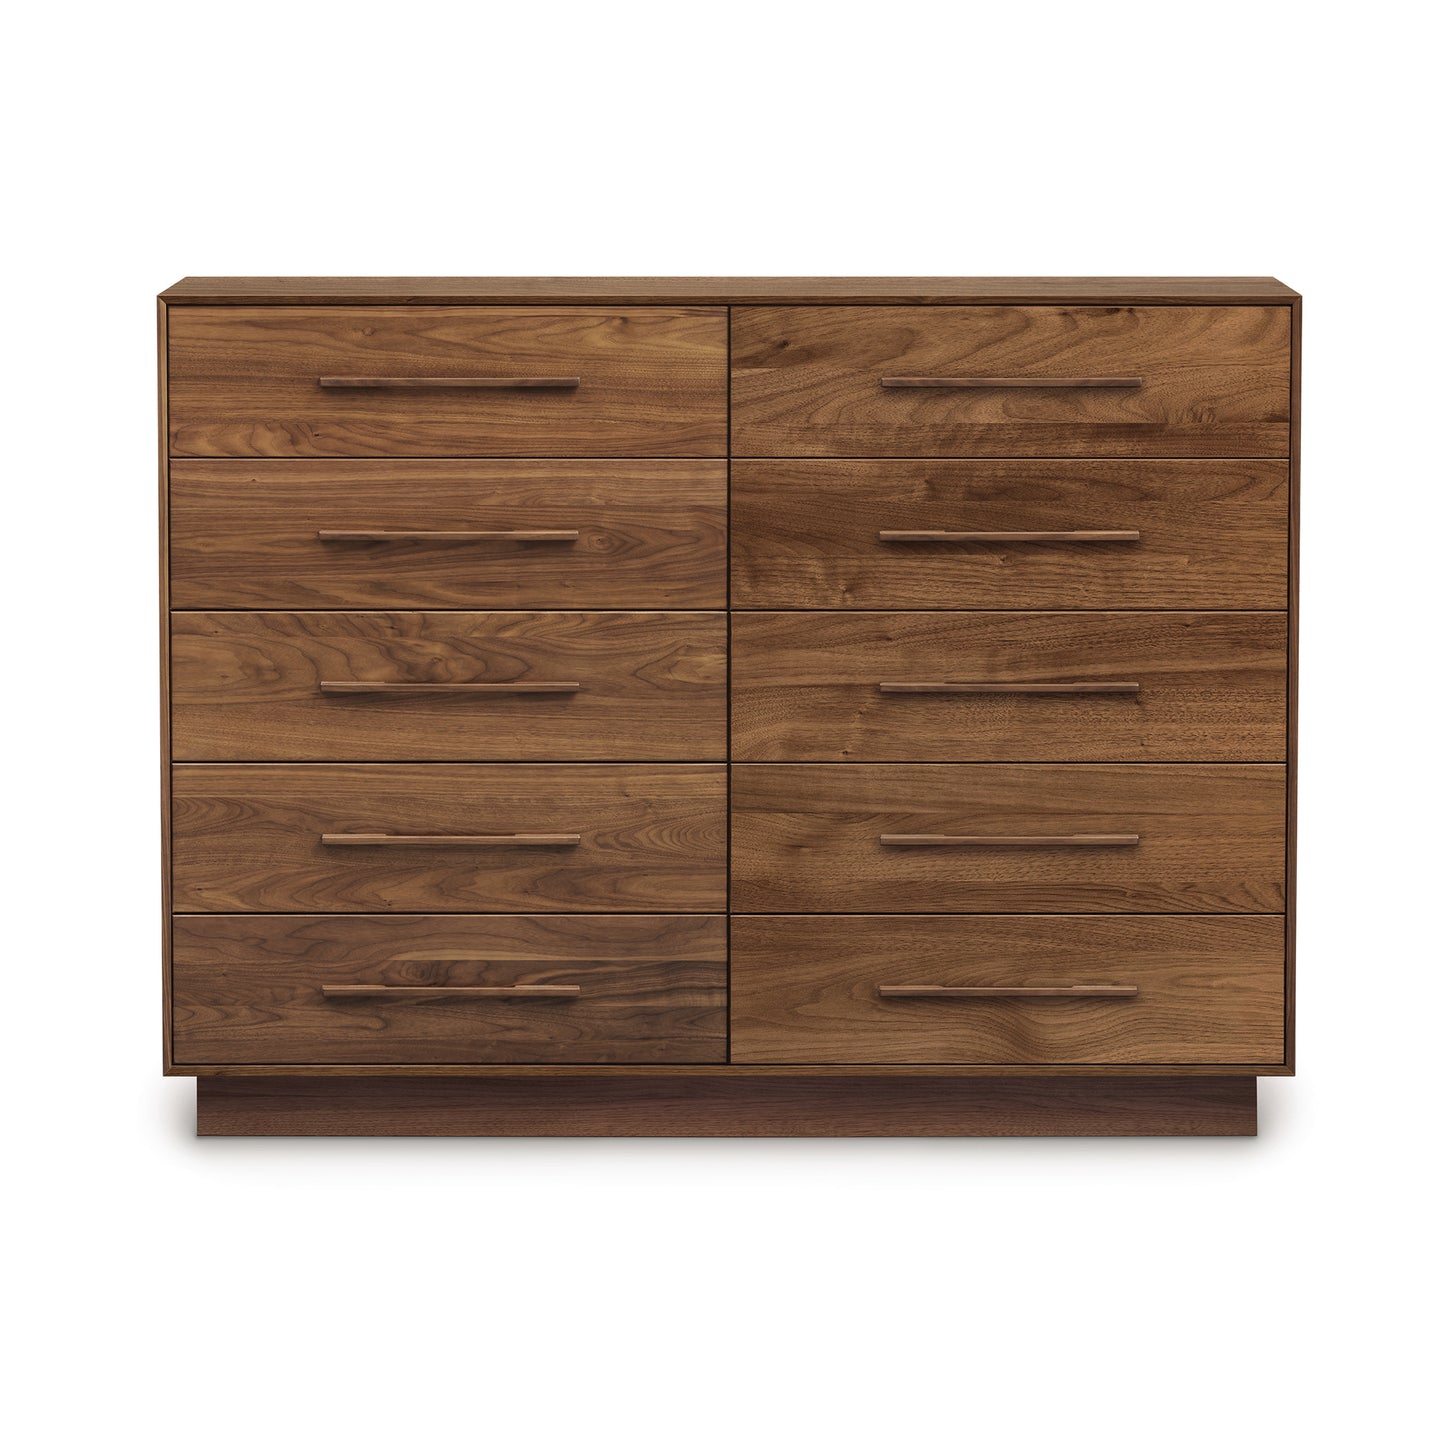 A modern, eco-friendly wooden dresser with six drawers from the Copeland Furniture Moduluxe Bedroom Collection, isolated against a white background.